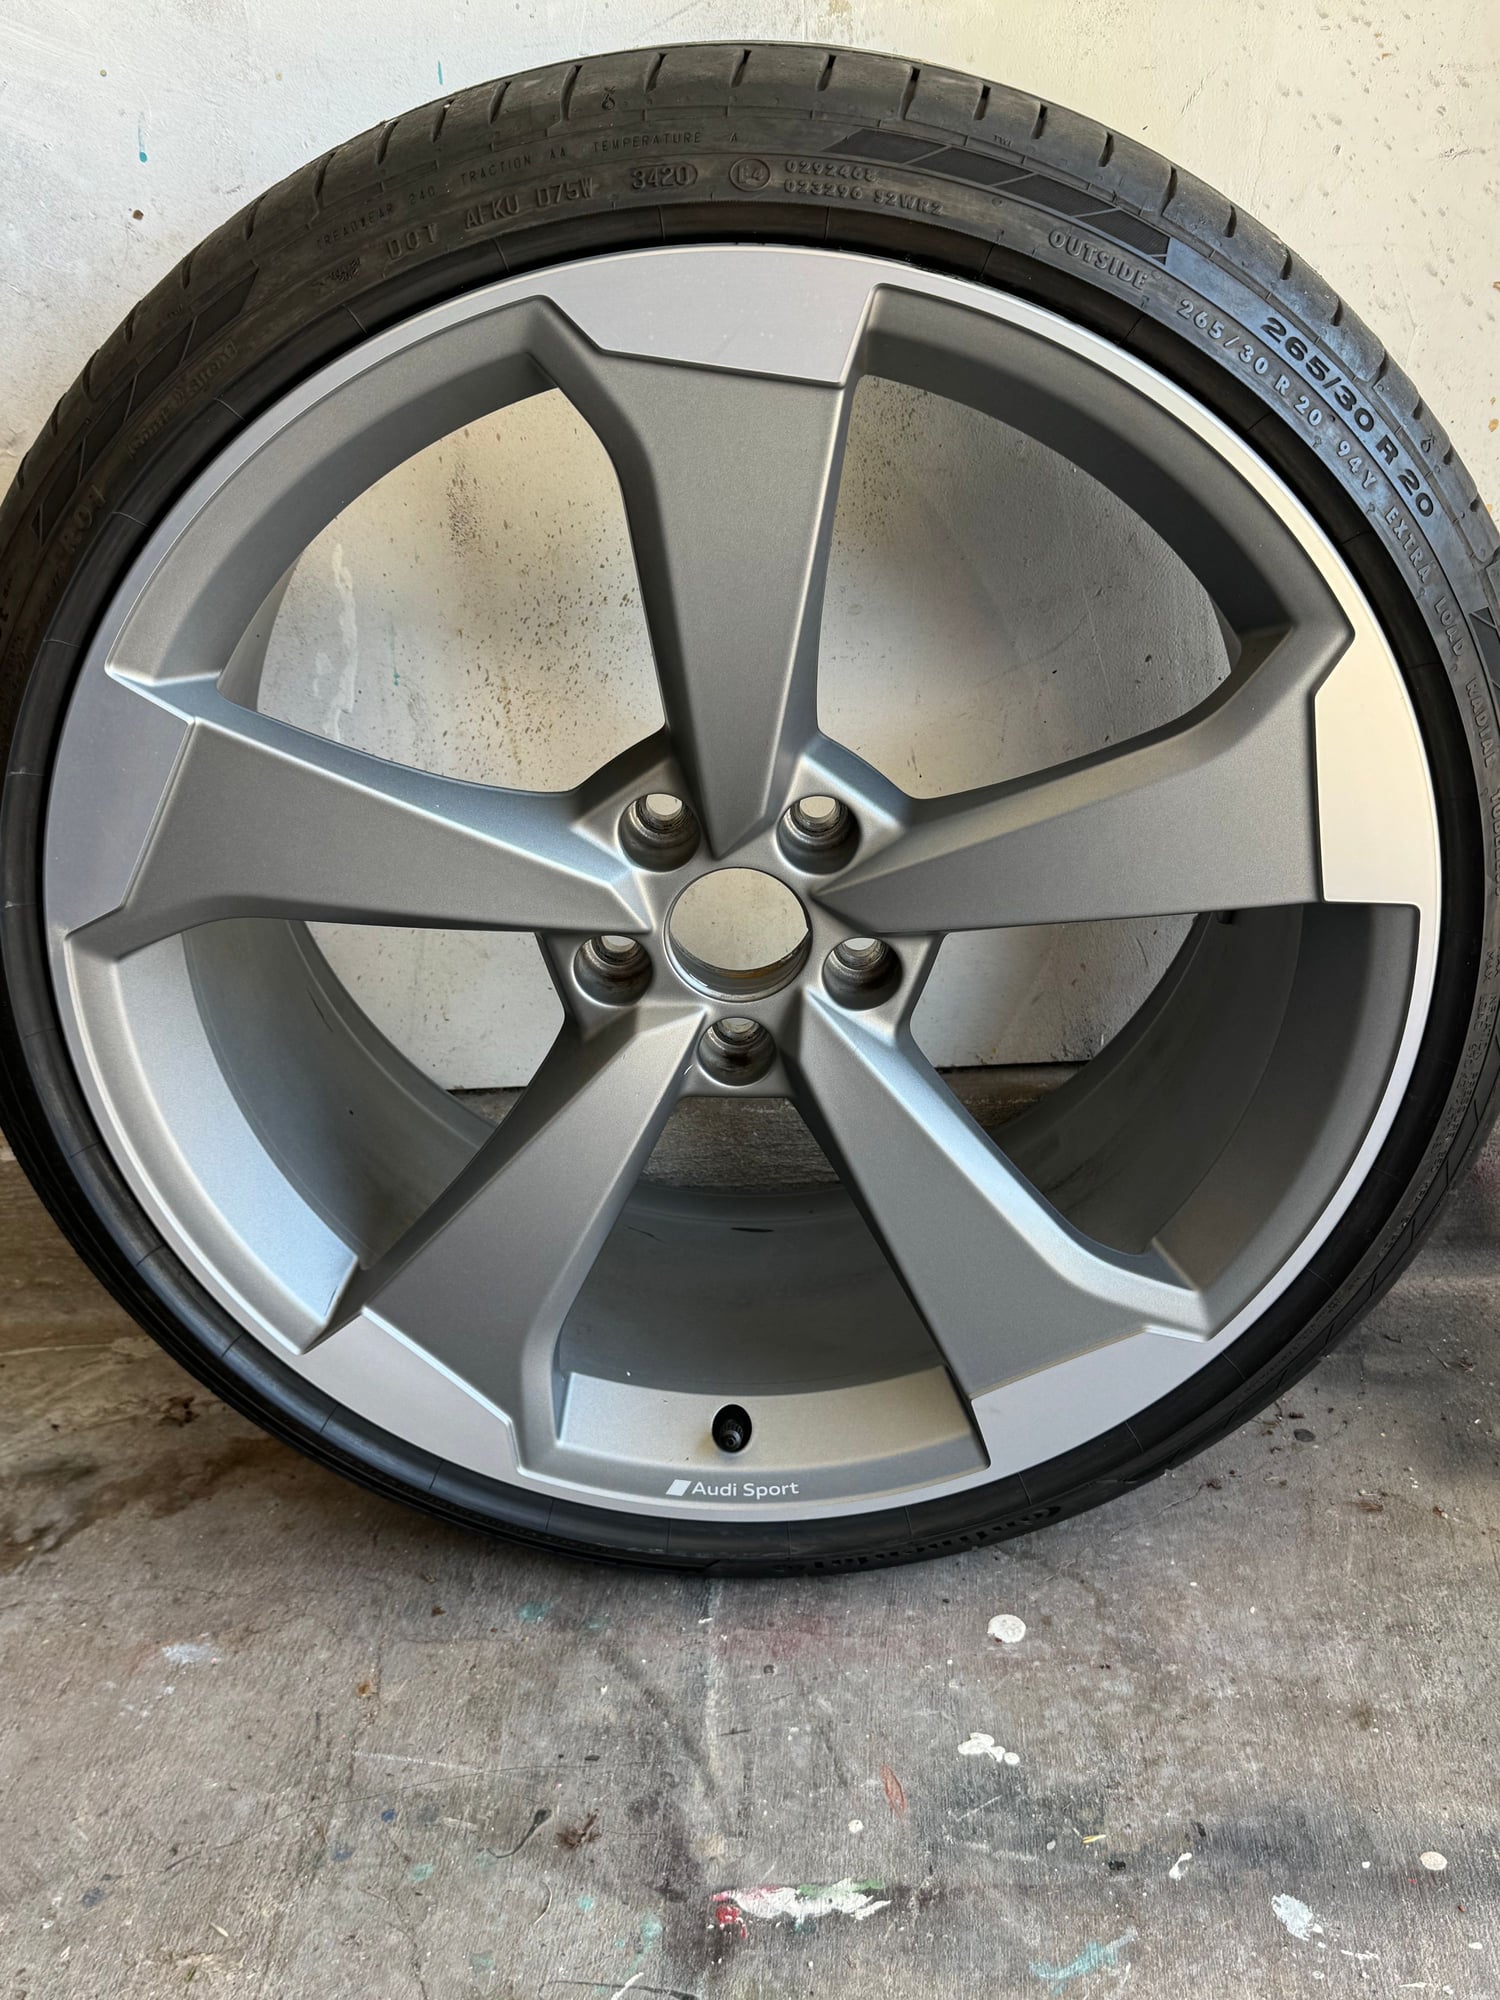 Wheels and Tires/Axles - OEM 20" Titanium Rotor wheels with tires $2,000 OBO + shipping - Used - 2018 to 2024 Audi S5 - Crowley, TX 76036, United States